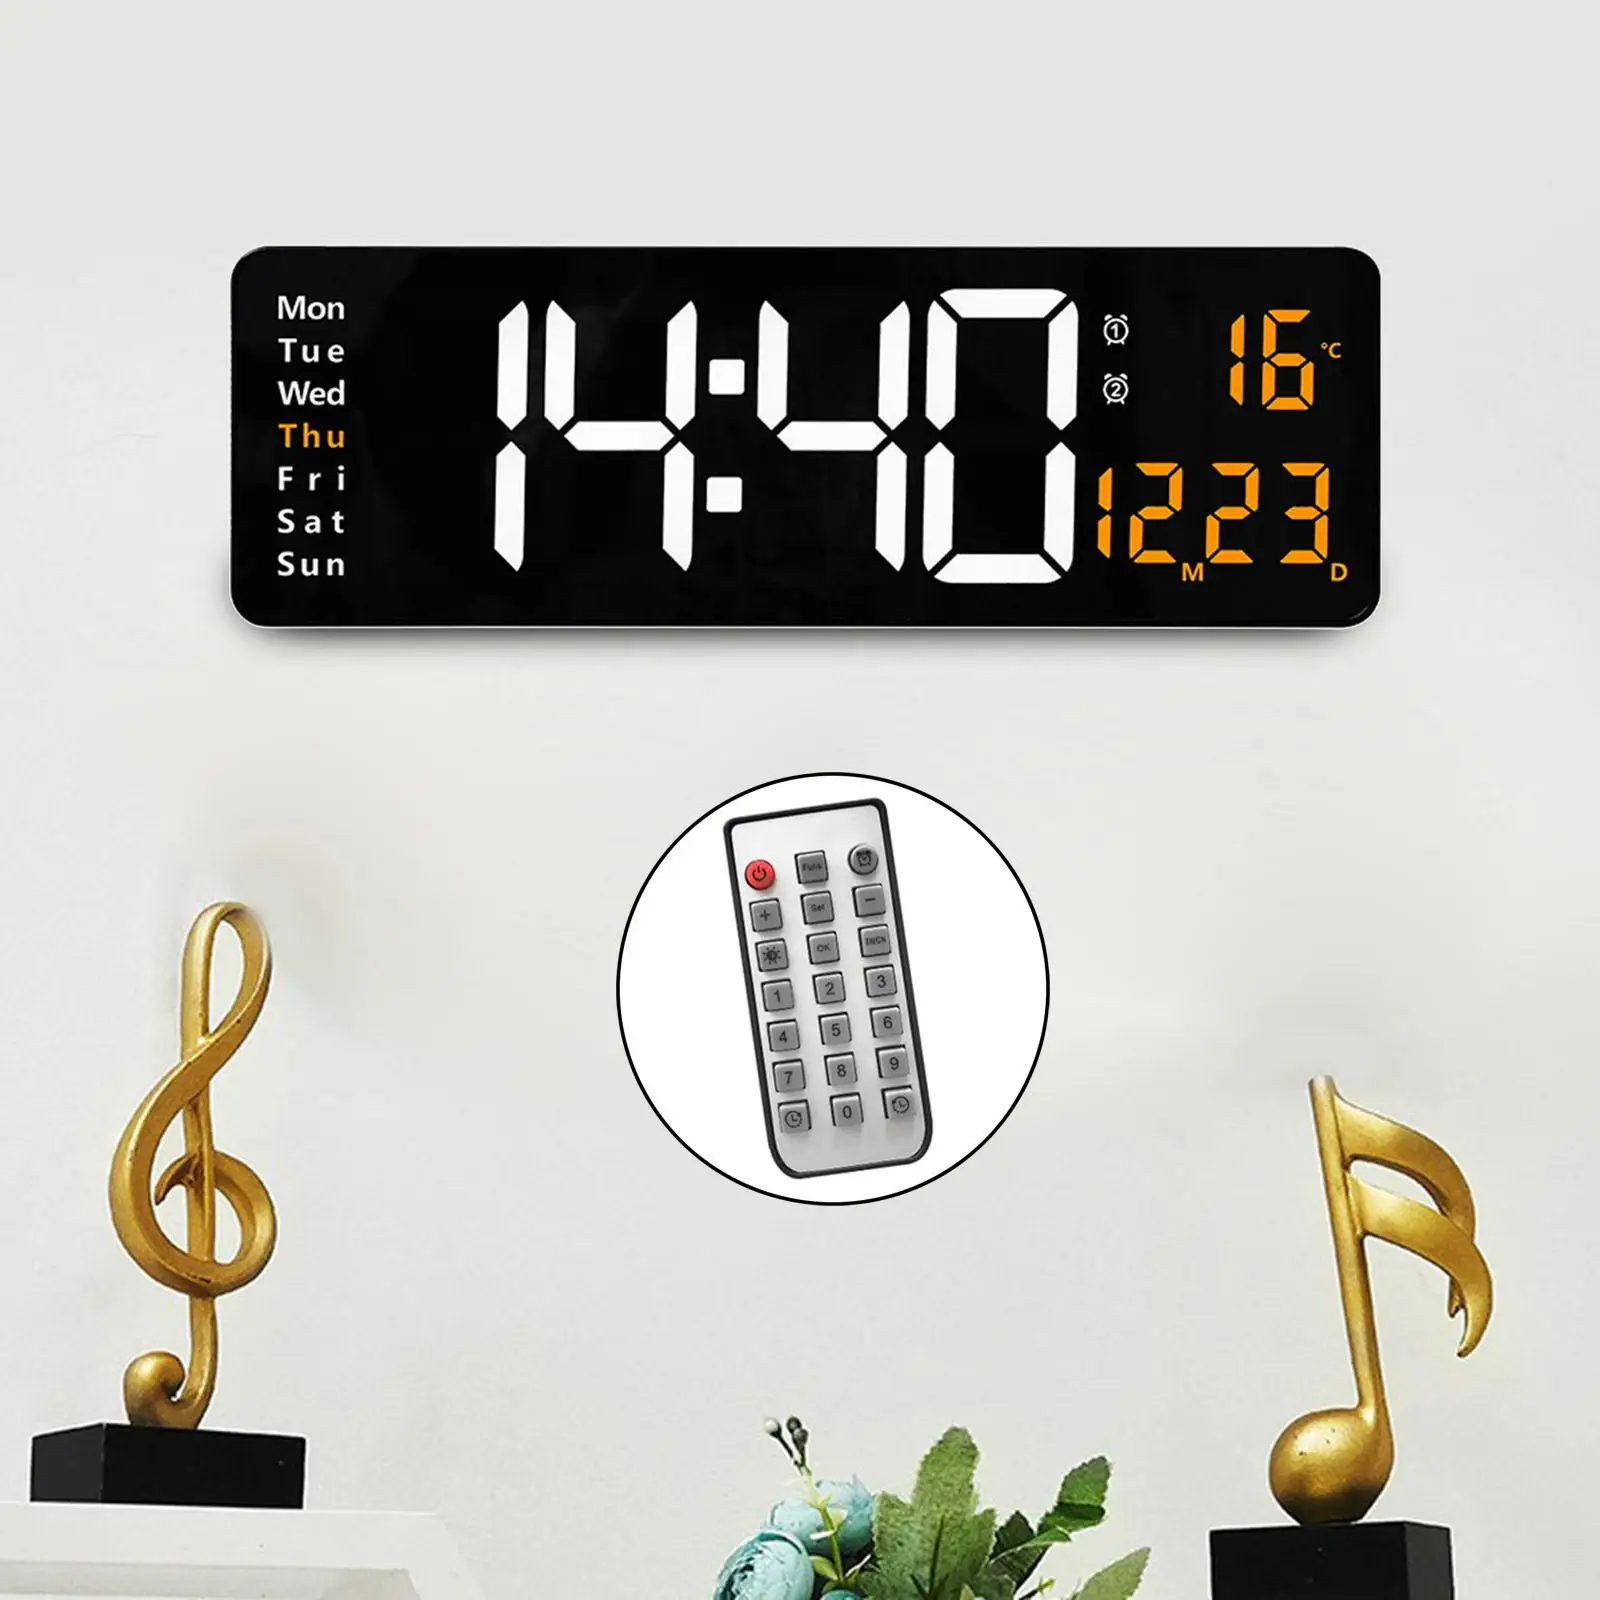 square wall clock Oversized 15" Digital LED Wall Clock USB with Remote Memory Function Temp Timer Large Number Desk Alarm for Classroom Gift Home outdoor clock